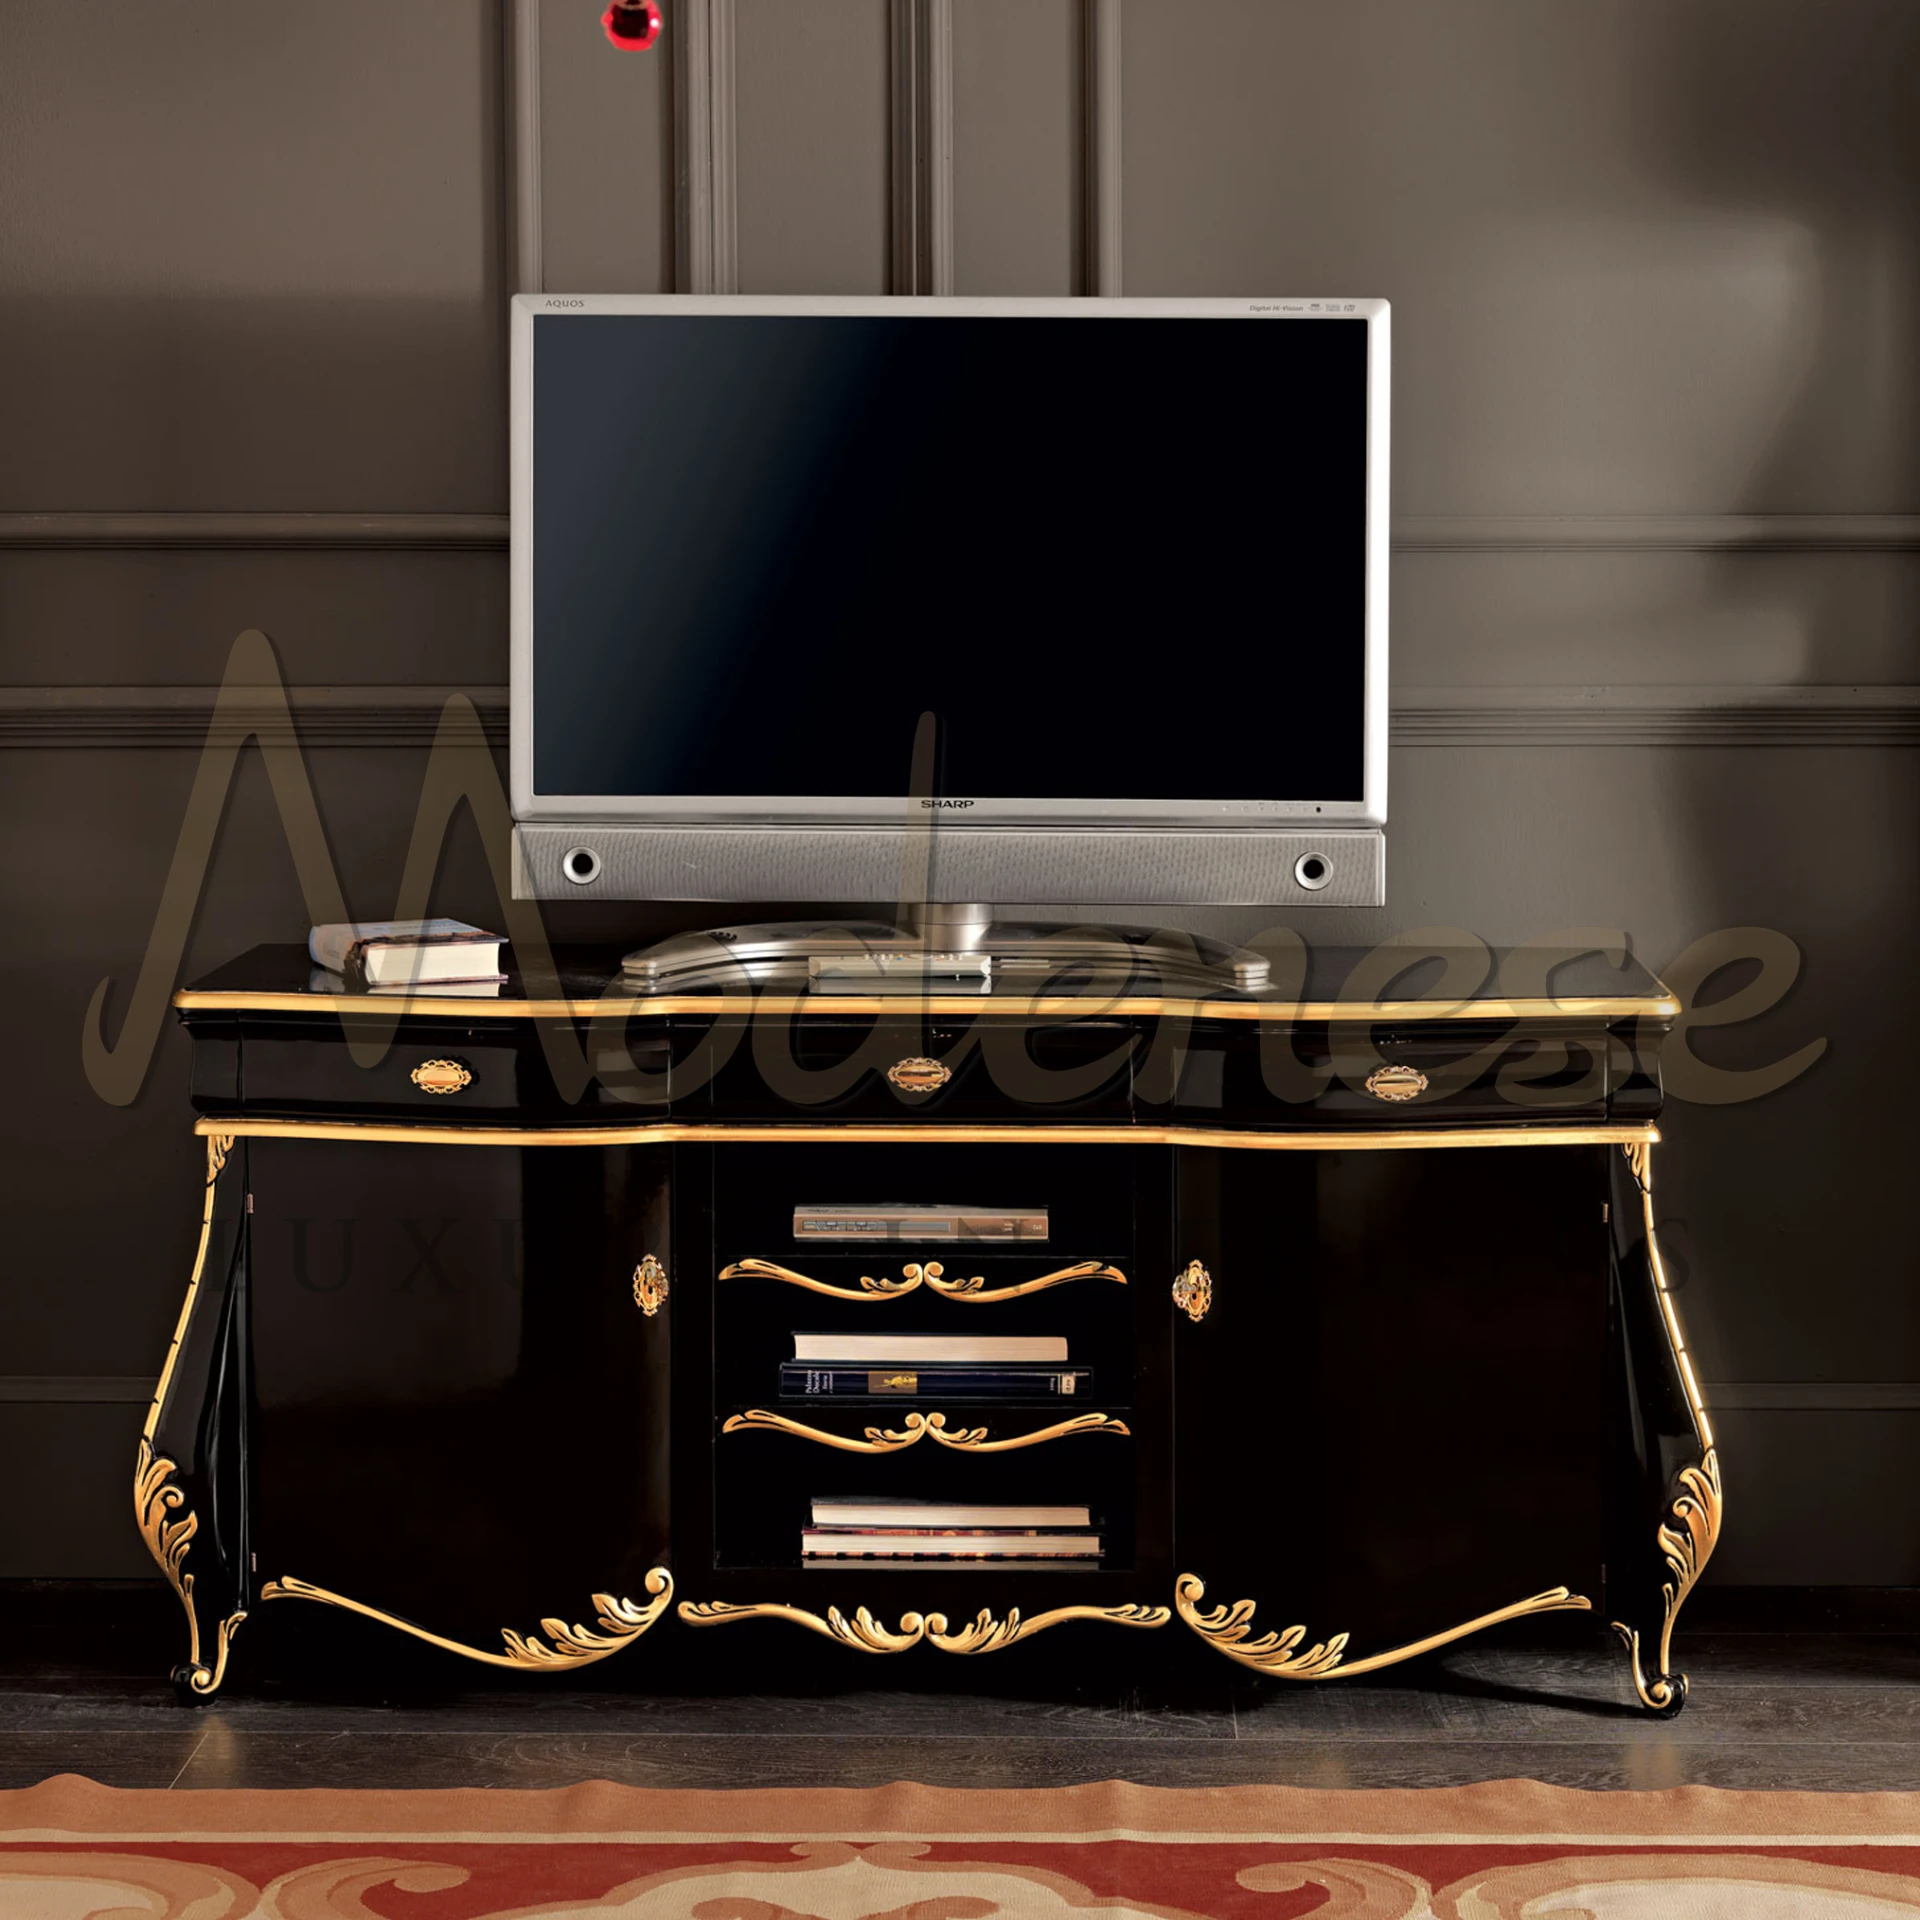 Customizable Black Noble TV Stand, blending modenese interiors with grand luxury, tailored to your lifestyle and design needs.
